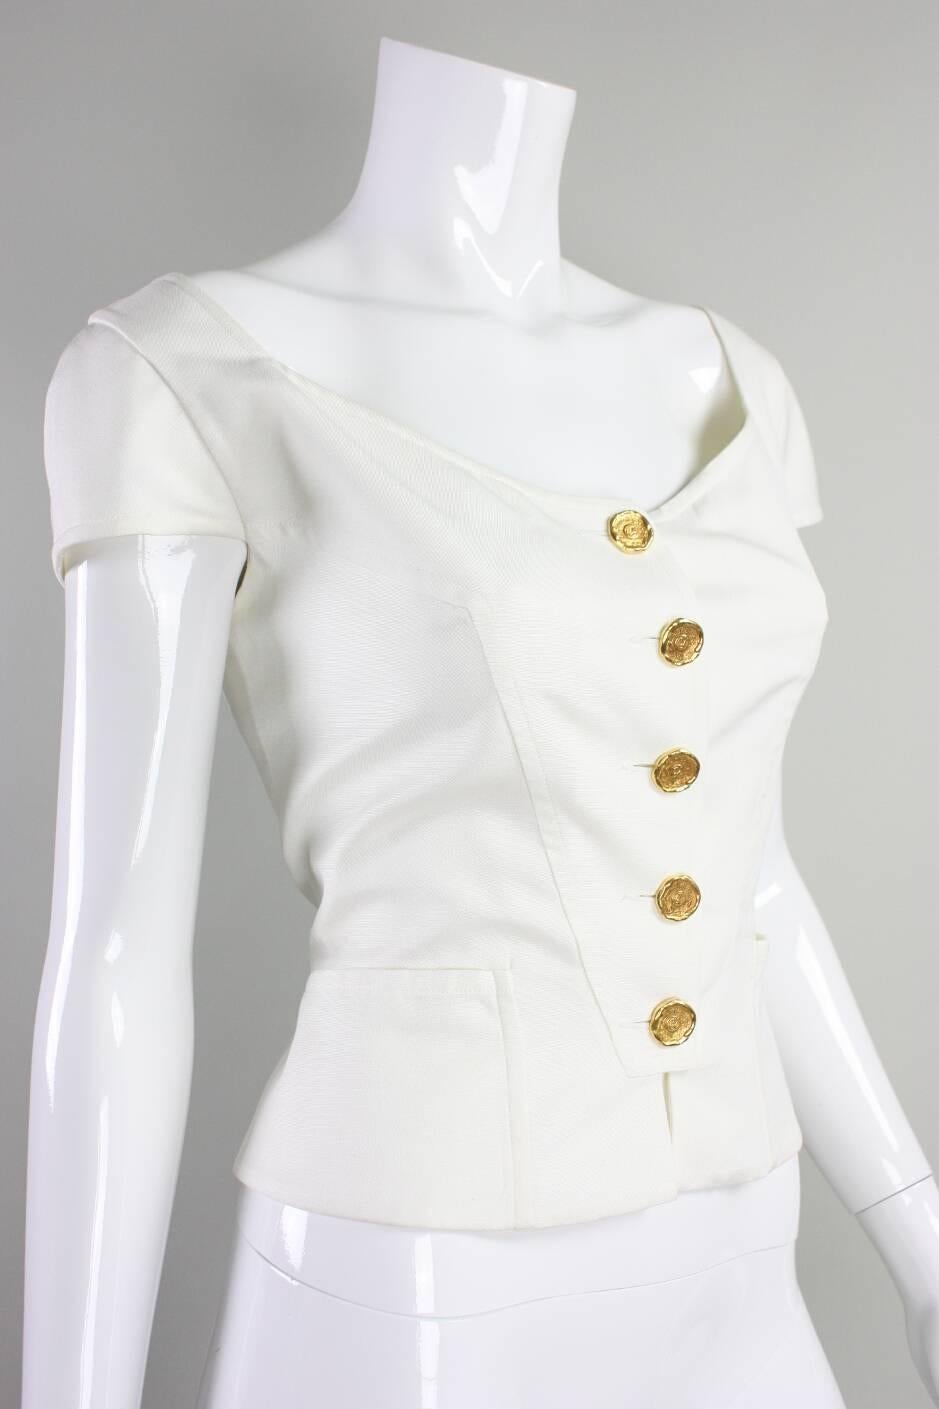 Vintage bodice from Christian Lacroix likely dates to the 1990's.  Scoop neck. Cap sleeves. Center front gold-toned button closure.  Fully lined.

No size label.

Measurements-

Bust: 36"
Waist: 28"
Across Shoulders: 15"
Sleeve